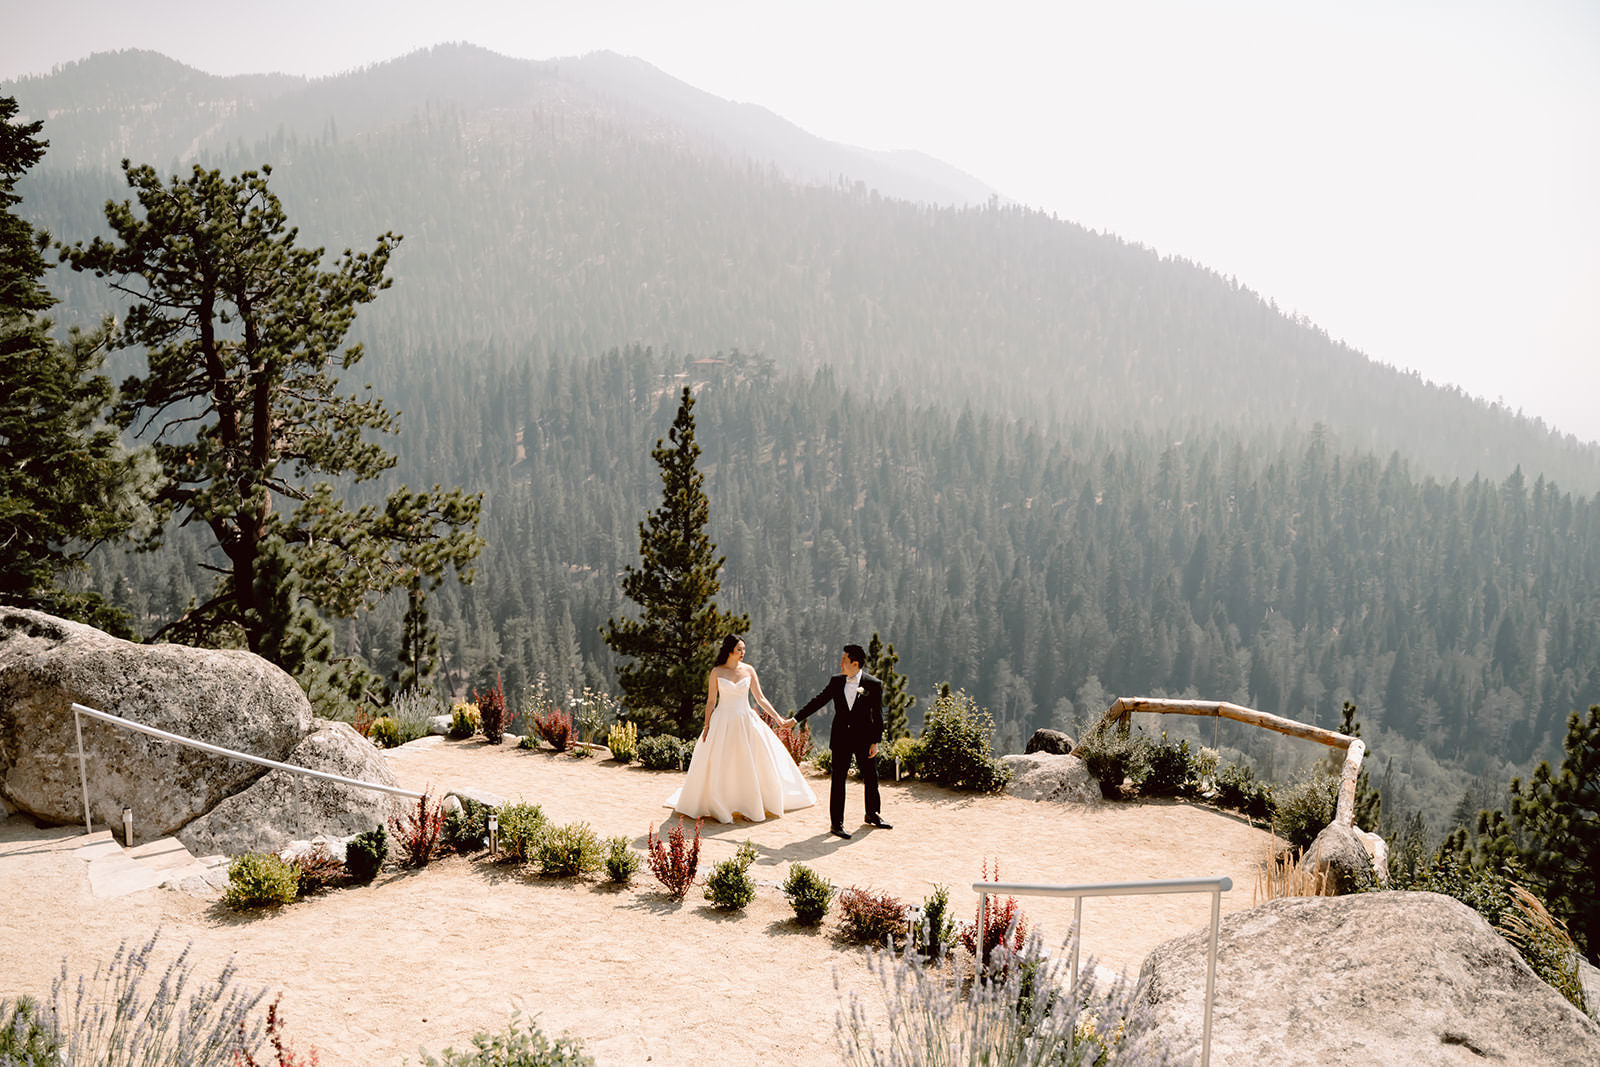 A bride and groom walking at the viewpoint of the Tahoe Blue Estate in Lake Tahoe for their wedding day